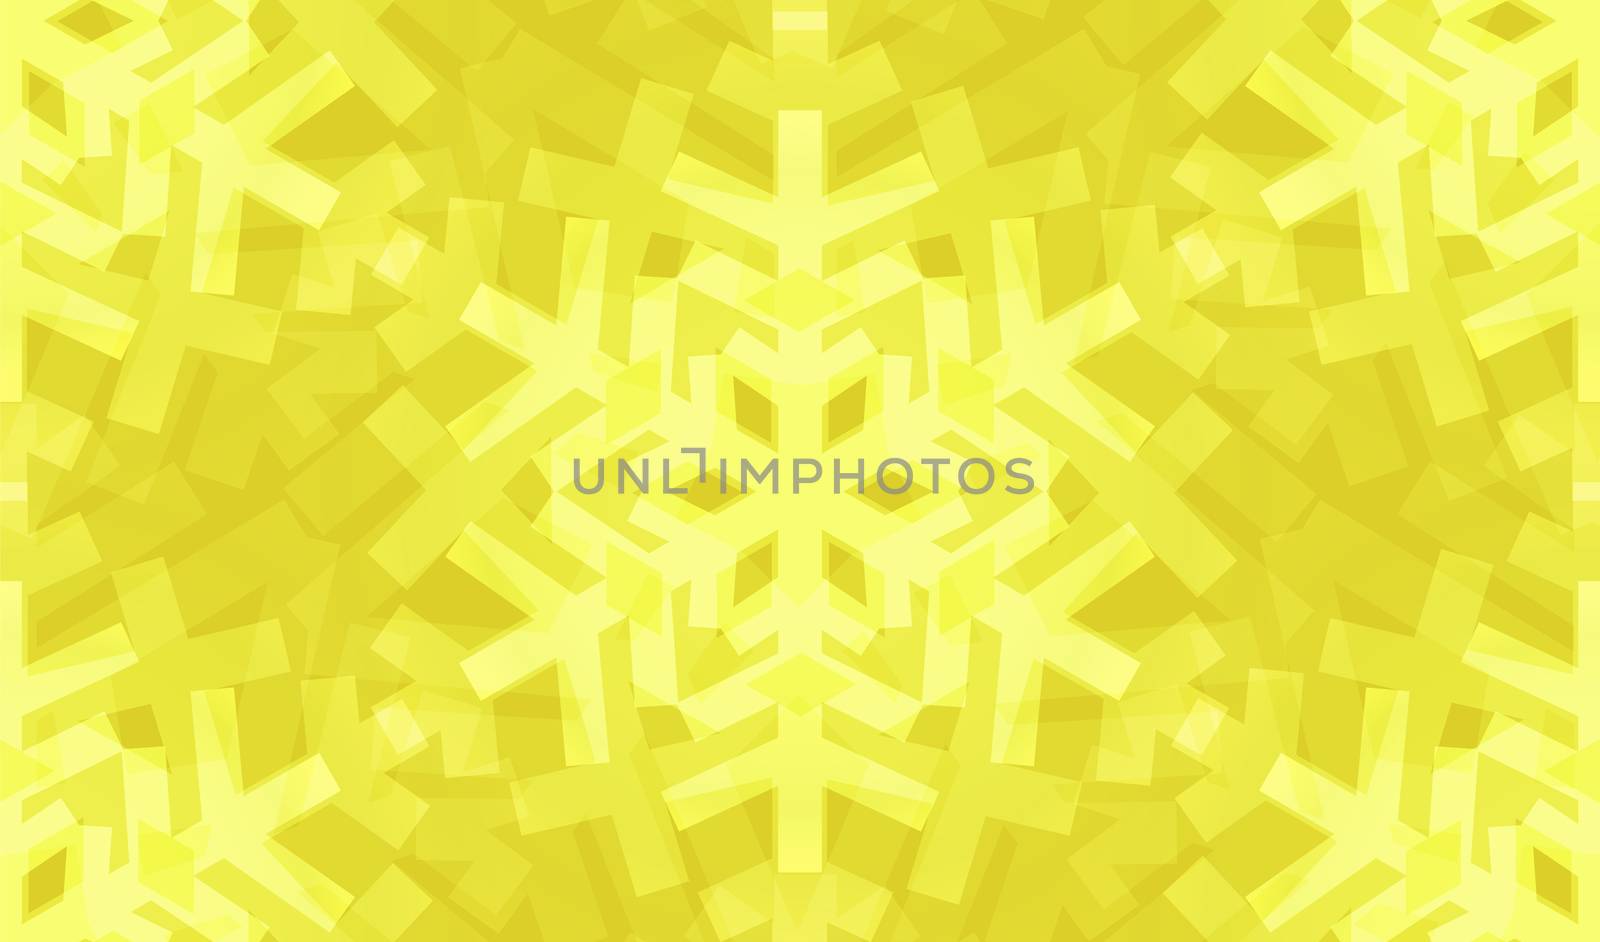 Awesome Shiny Lemon Snowflakes Seamless Pattern for Winter or Christmas Desing.